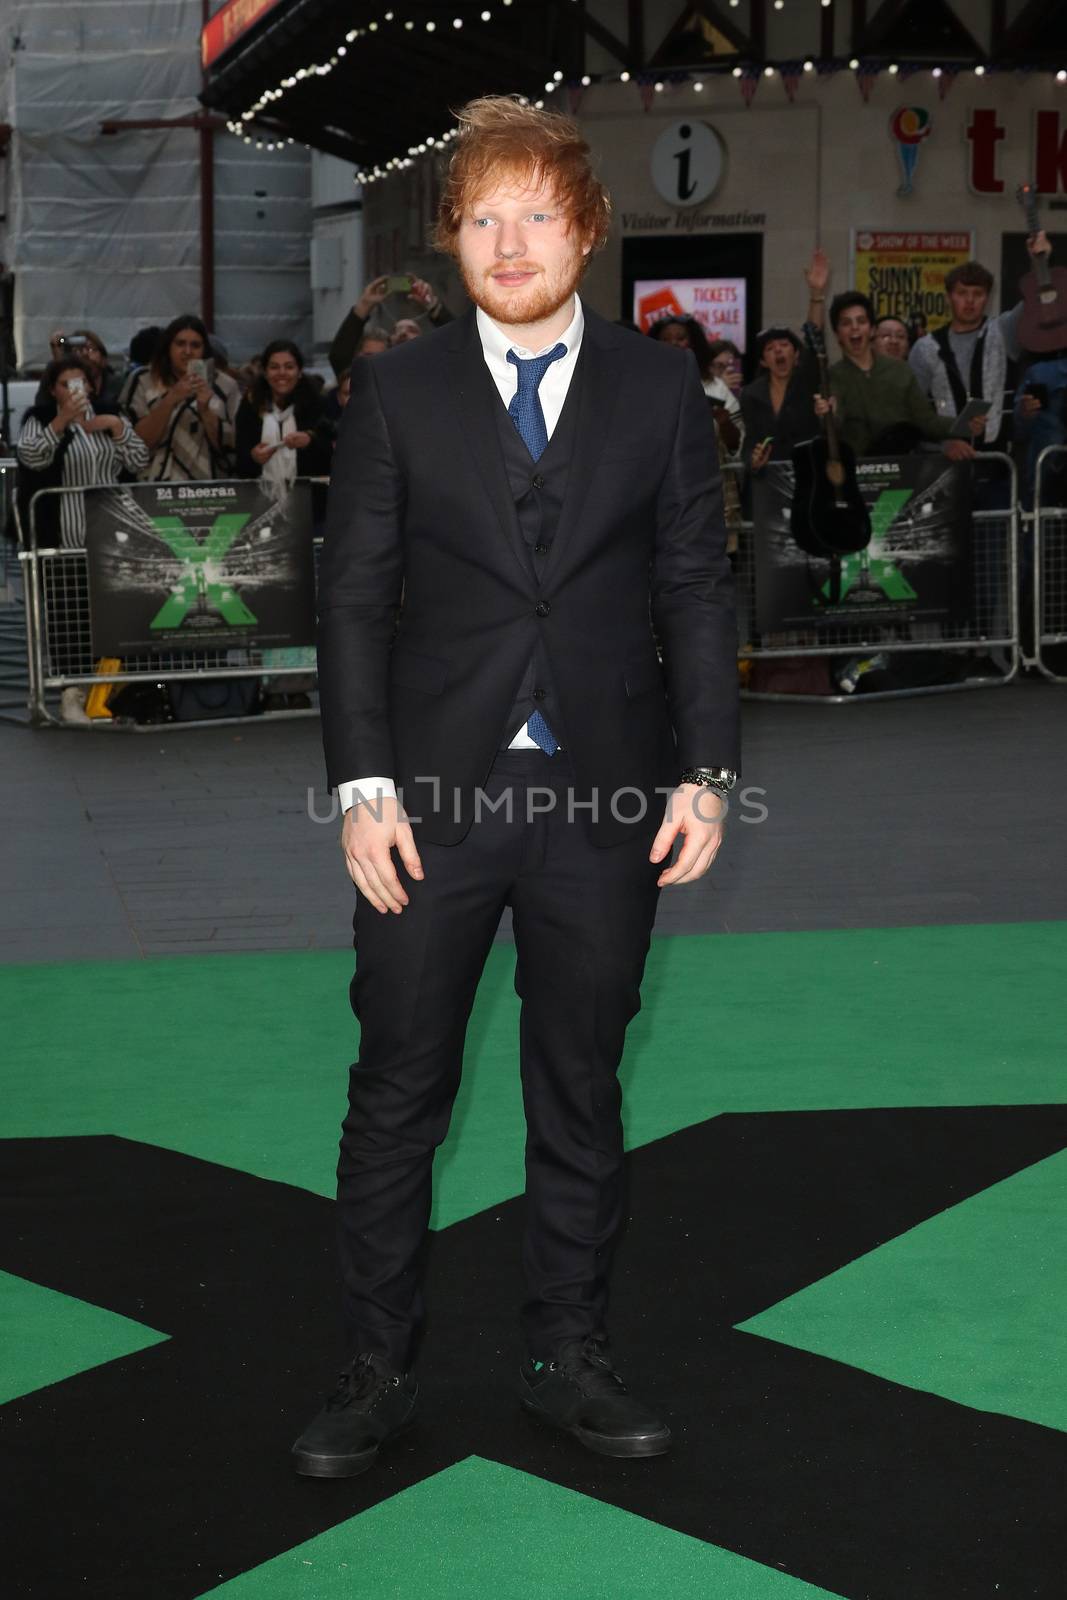 UNITED KINGDOM, London: Ed Sheeran attends the world premiere of Ed Sheeran: Jumpers for Goalposts at Odeon Leicester Square in London on October 22, 2015. 